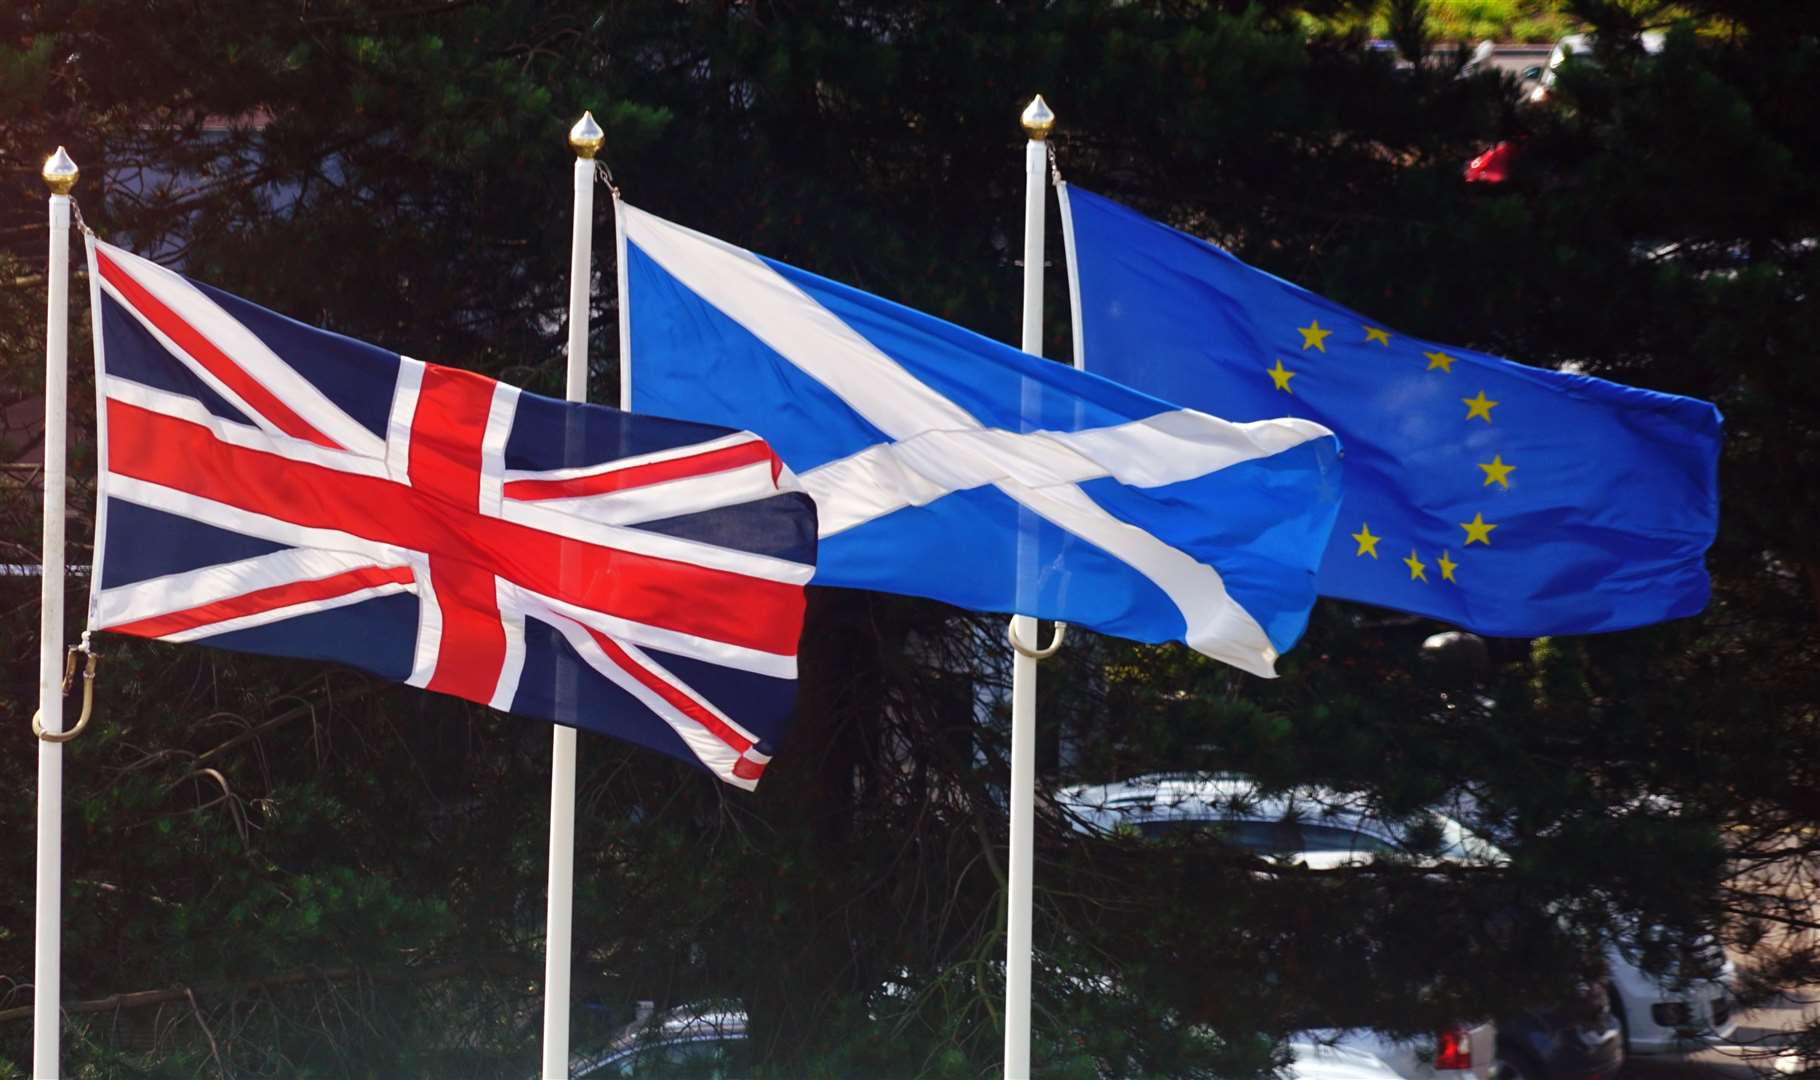 Scotland has a different relationship with the EU than the rest of the UK.